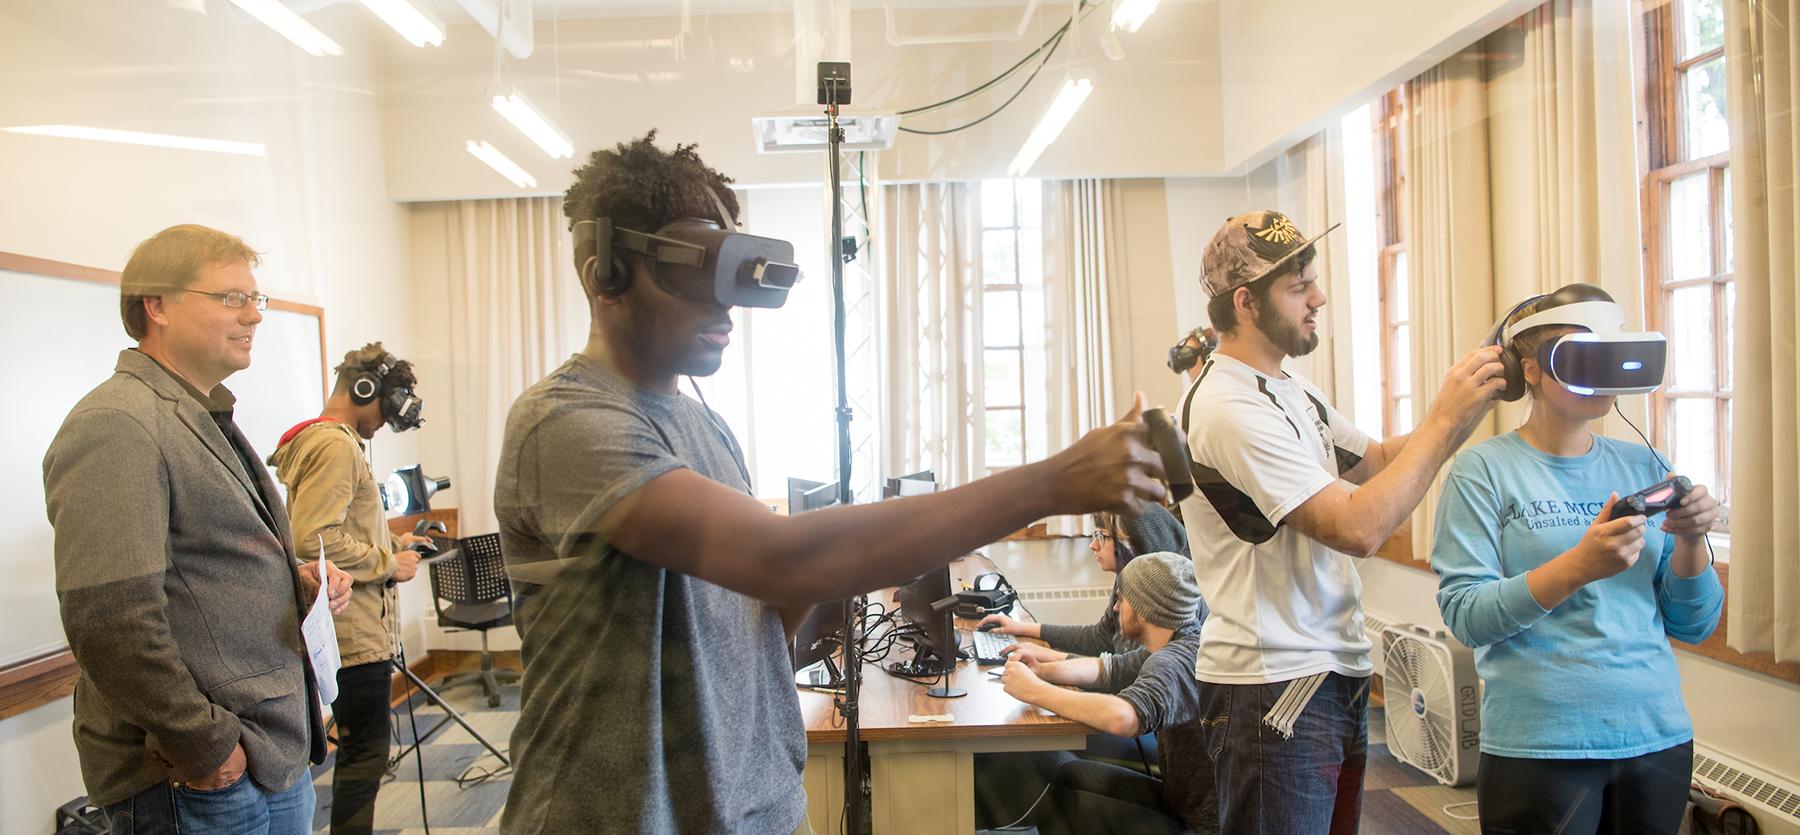 Students play games wearing virtual headsets